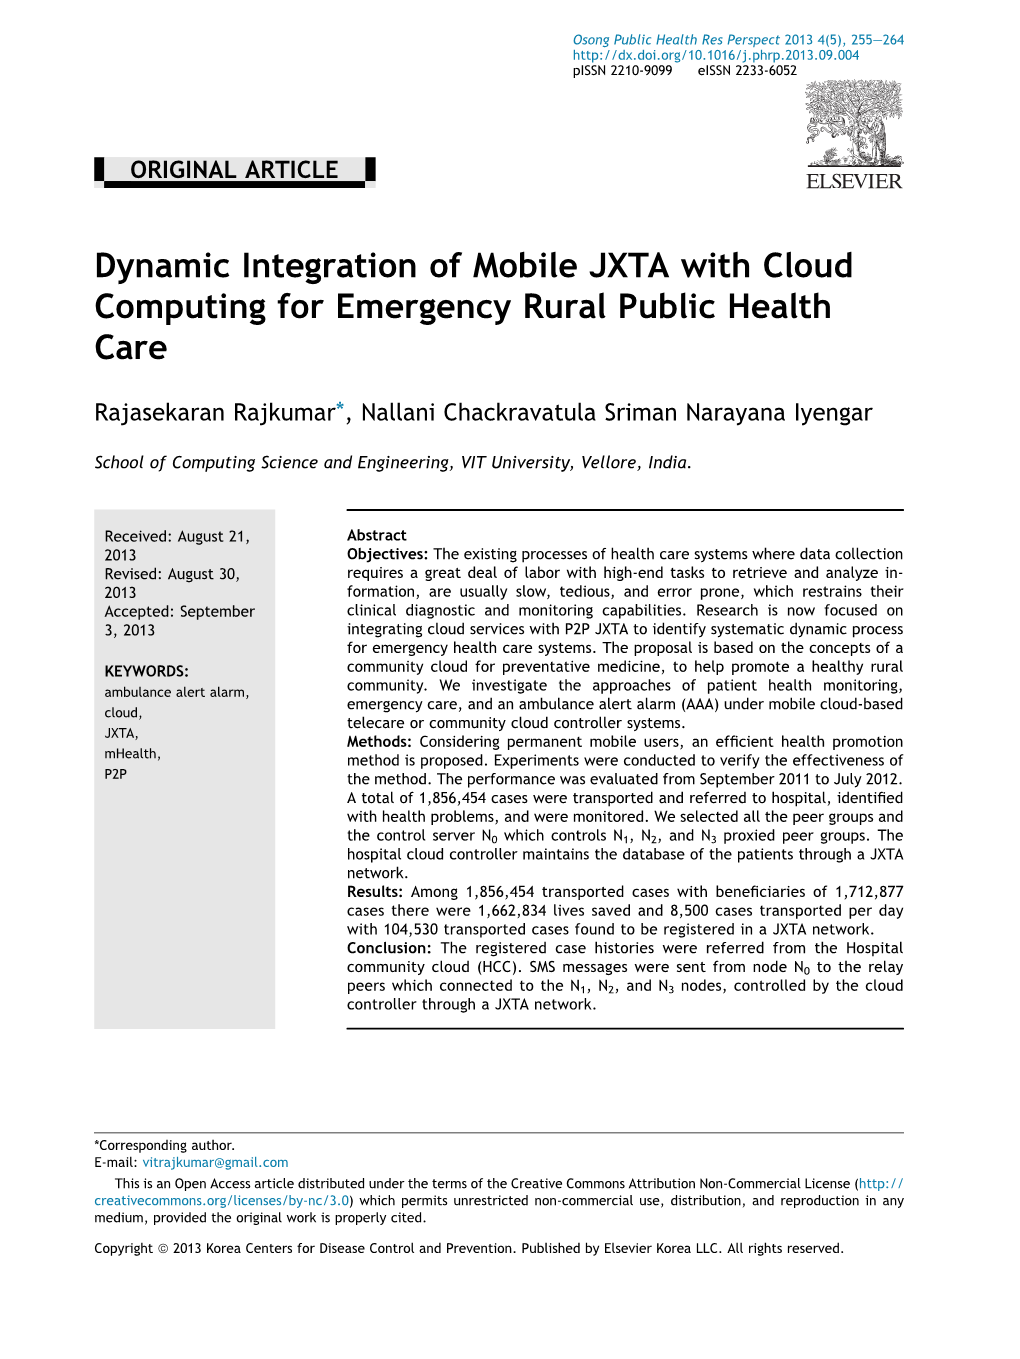 Dynamic Integration of Mobile JXTA with Cloud Computing for Emergency Rural Public Health Care